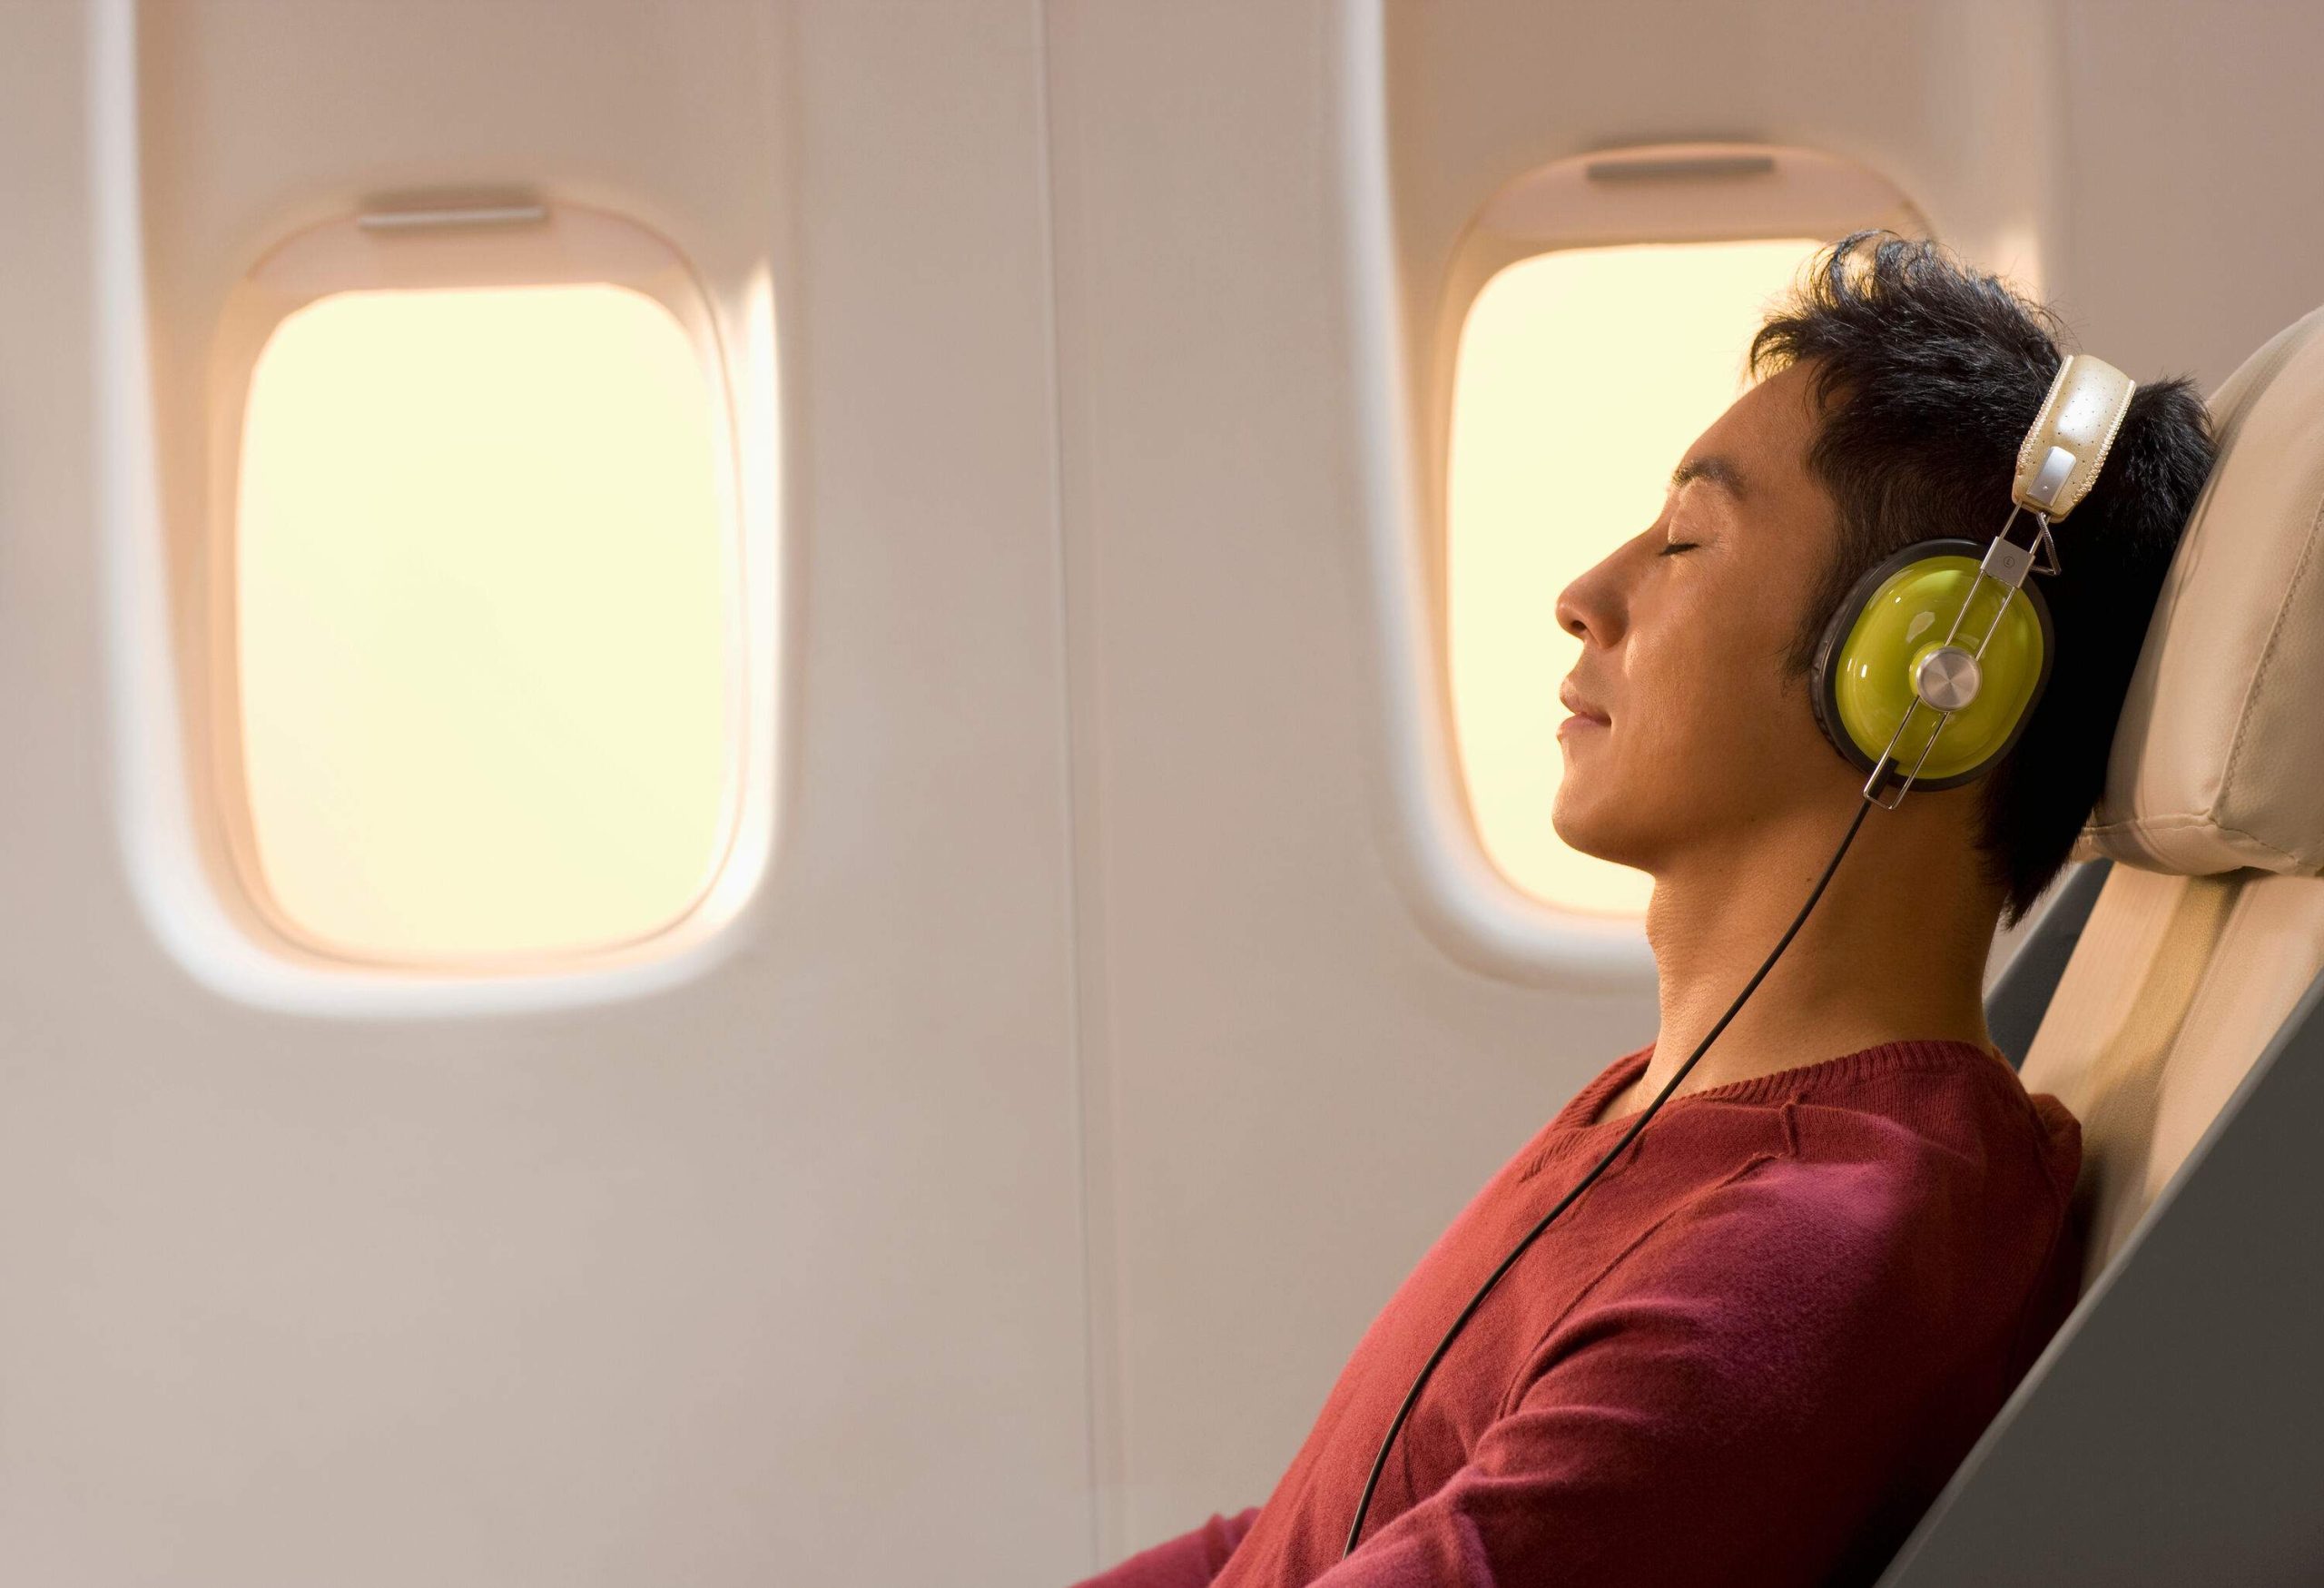 A male passenger in a window seat falling into slumber with headphones over his ears during a flight.